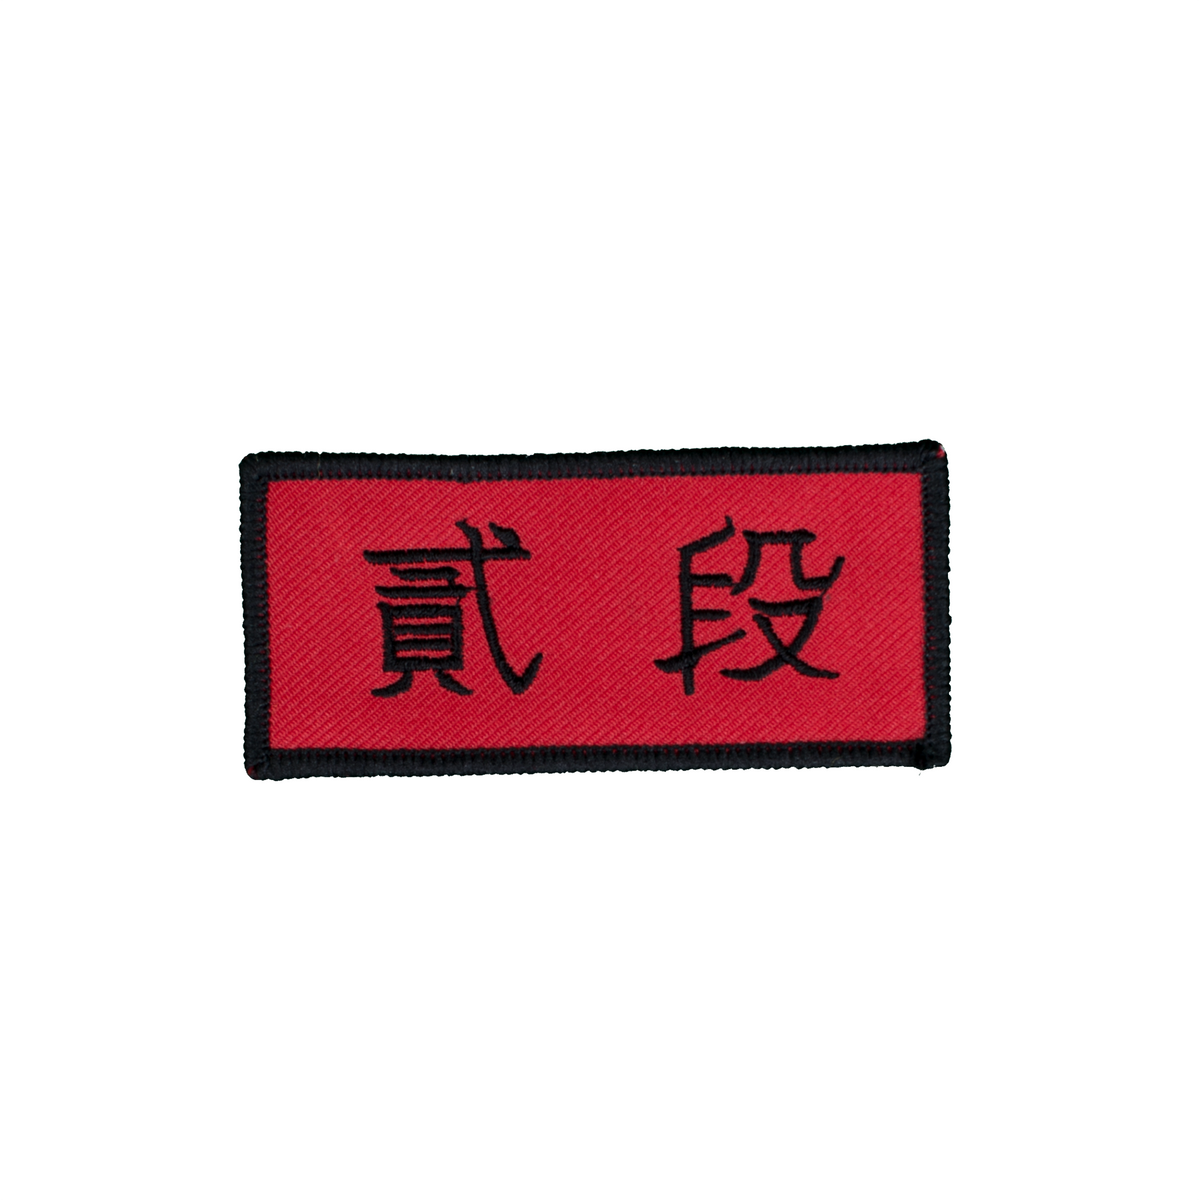 Blank Name Patch Curve Shape (Black) - Best Martial Arts / MOOTO USA